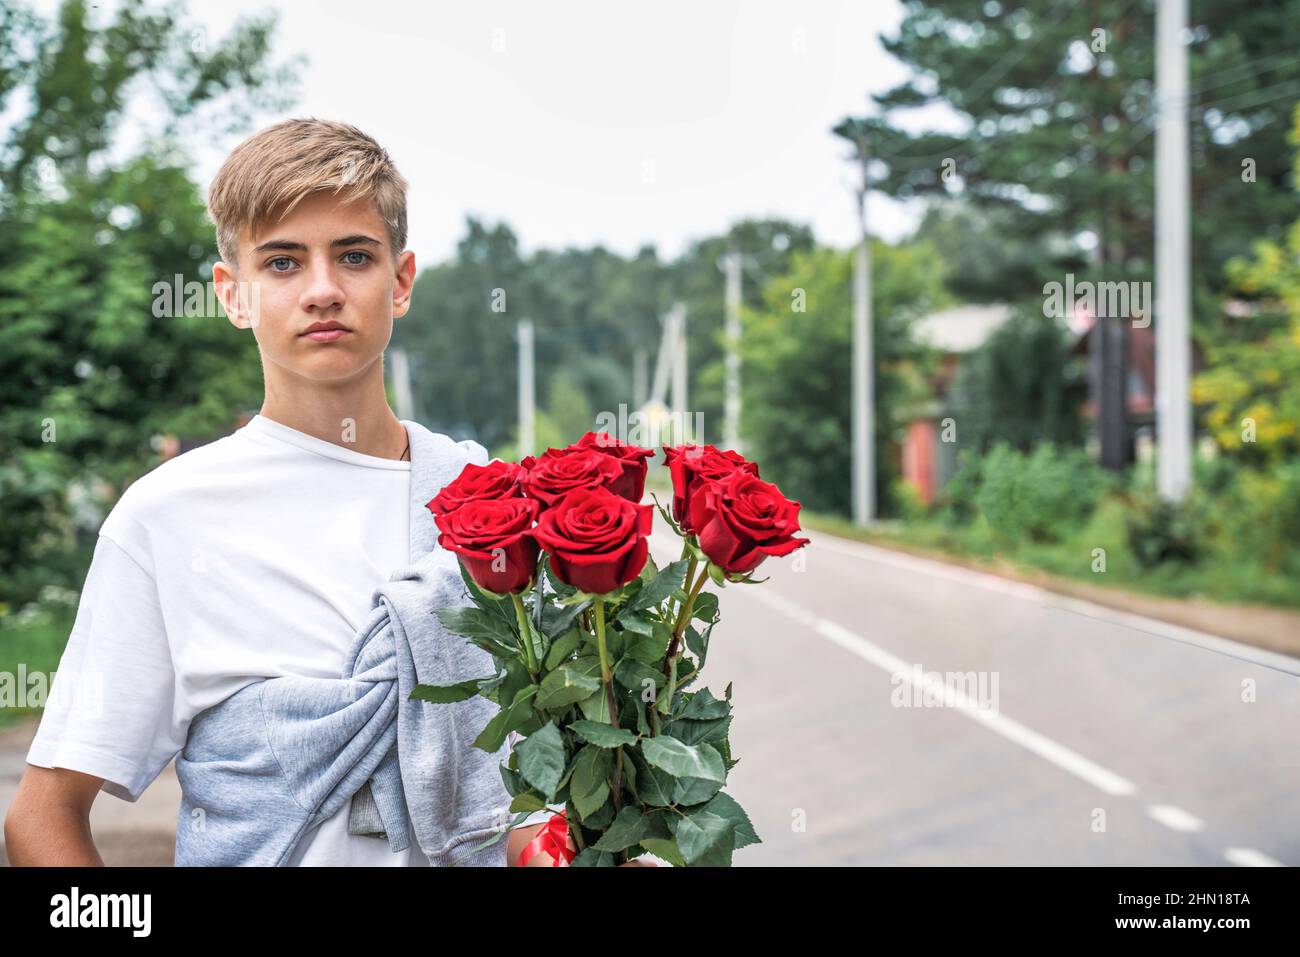 Handsome teenager holds a bouquet of red roses in his hands. Student, high school student, Romantic. Stock Photo